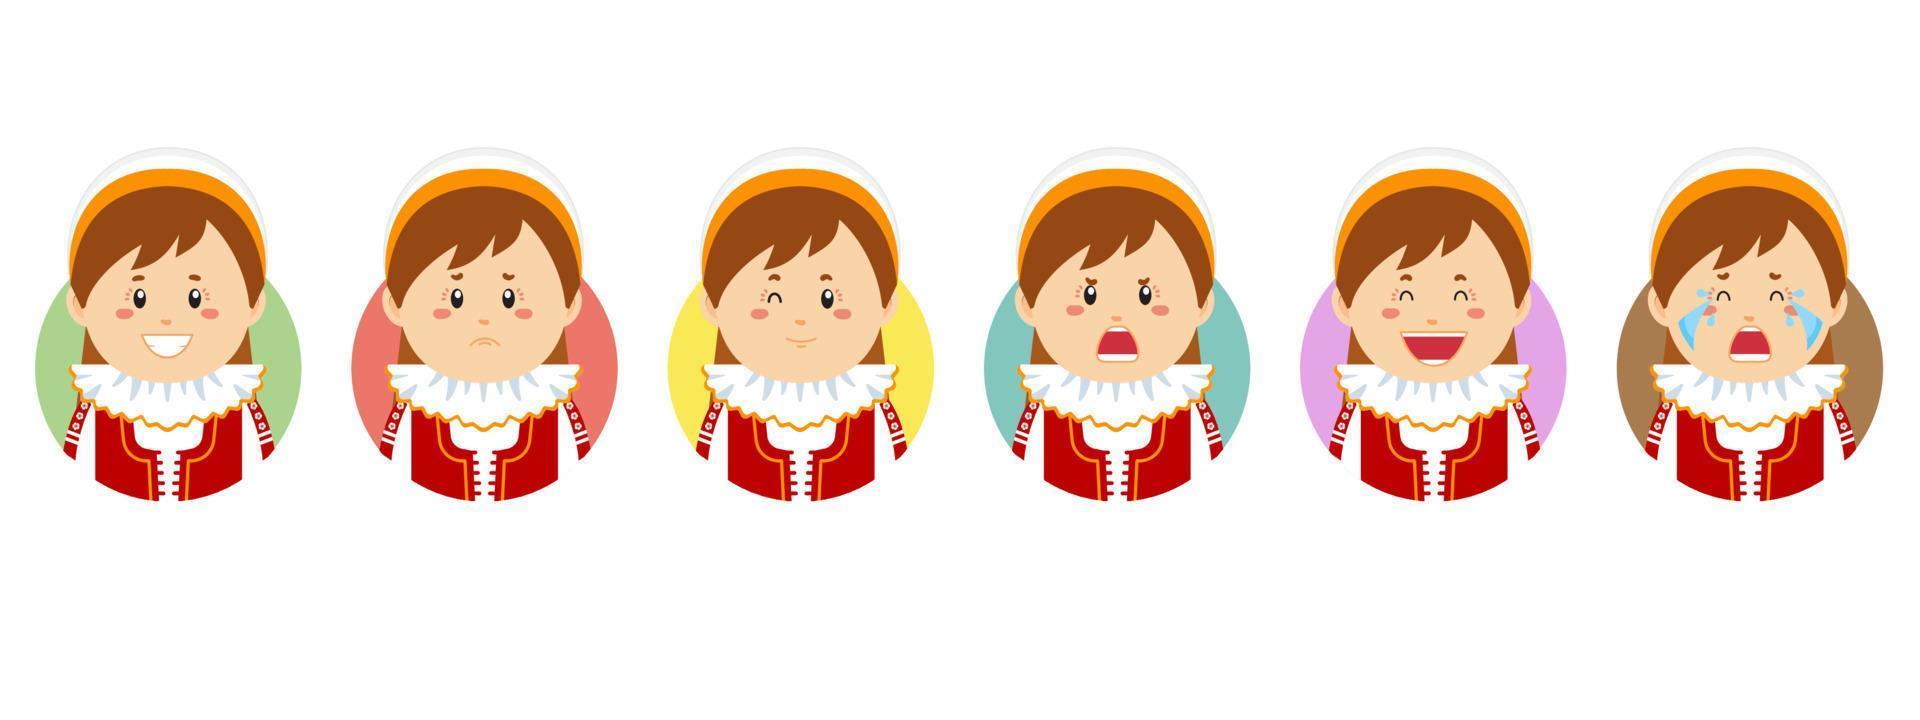 Slovakia Avatar with Various Expression vector